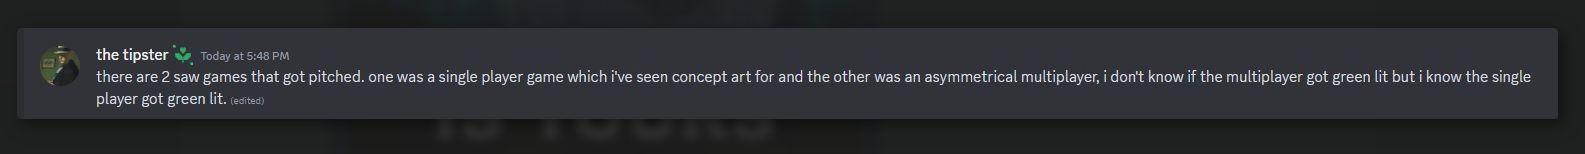 Discord Message From The Tipster